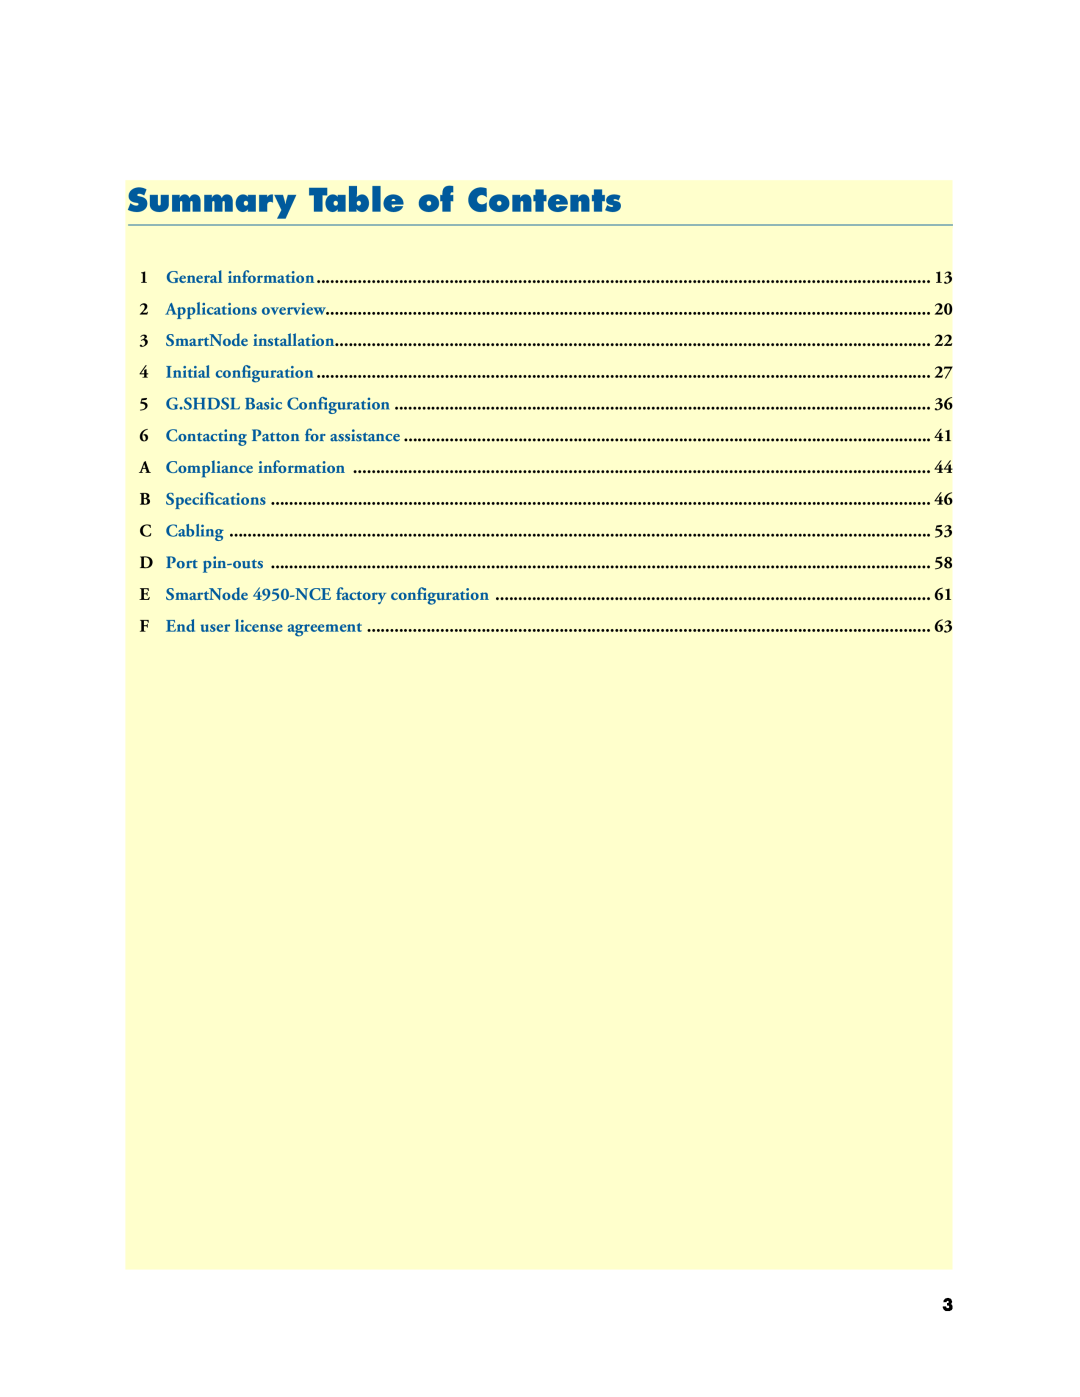 Patton electronic 4950-NCE manual Summary Table of Contents 